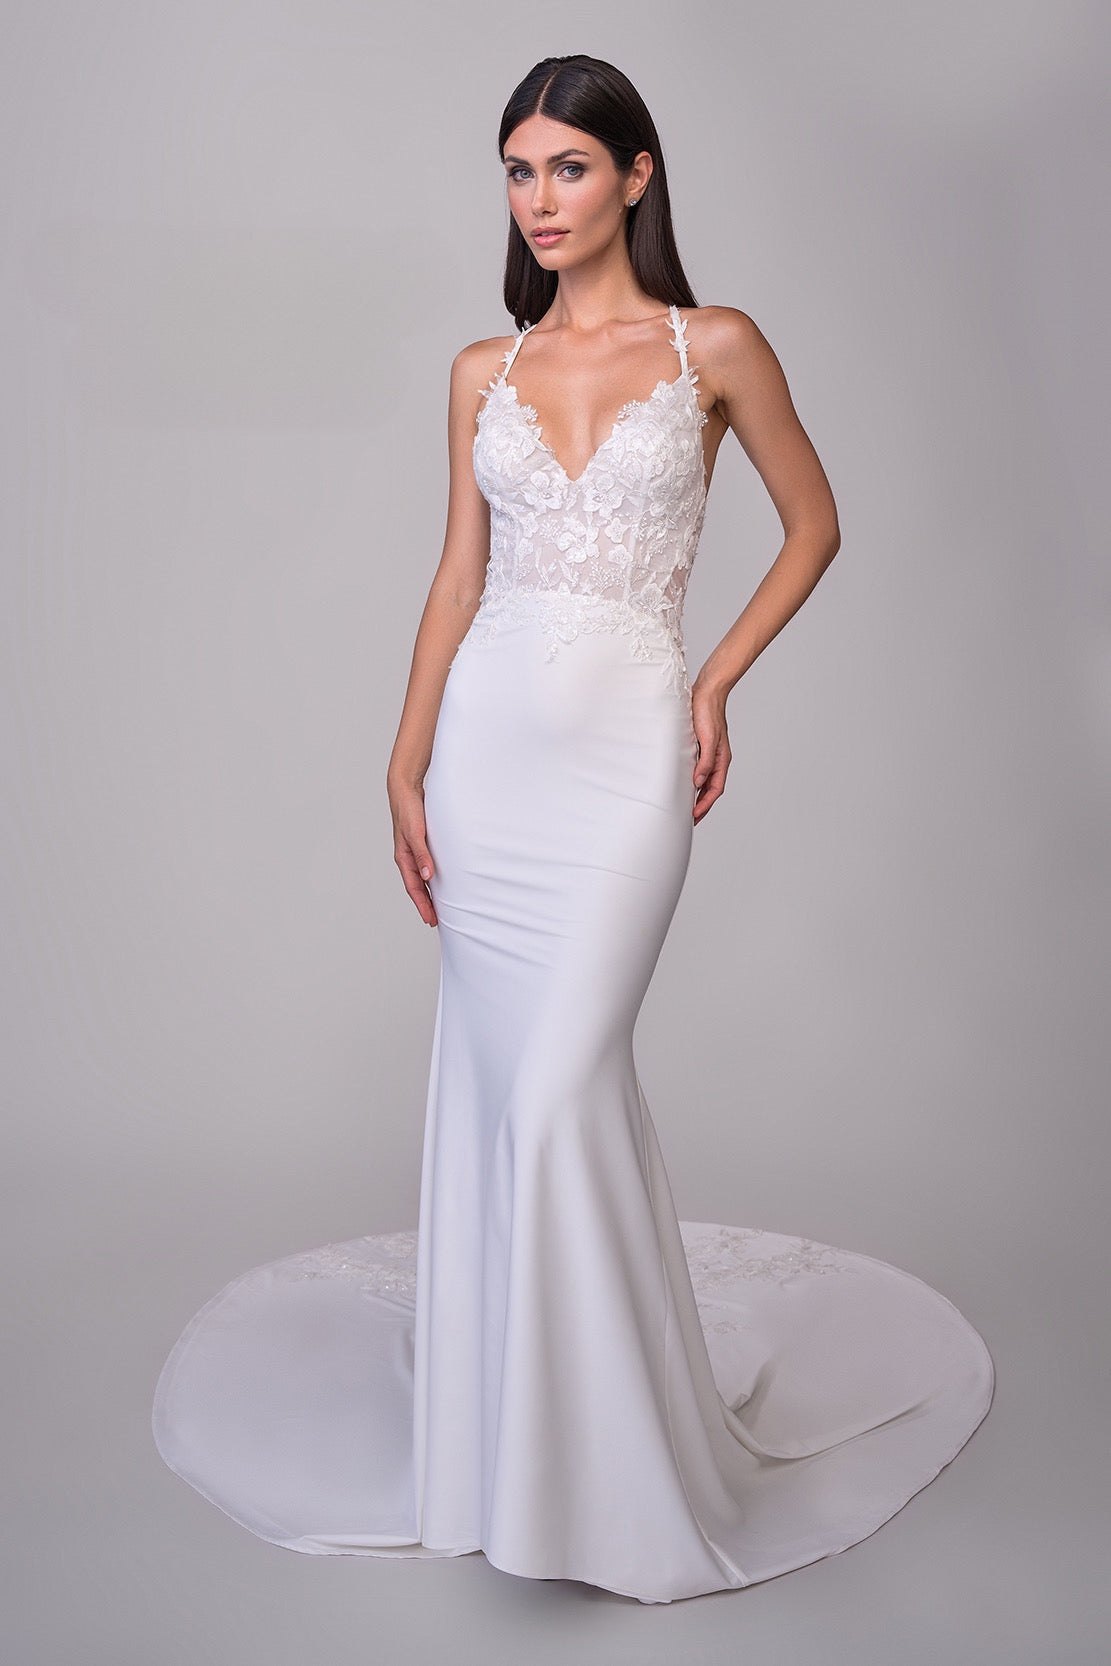 Joelle Oliva By La Femme J2165 Luna Bridal Gown - A luxurious jersey and lace bridal gown with an illusion back, lace applique bodice, and a sweeping train for a dramatic entrance.